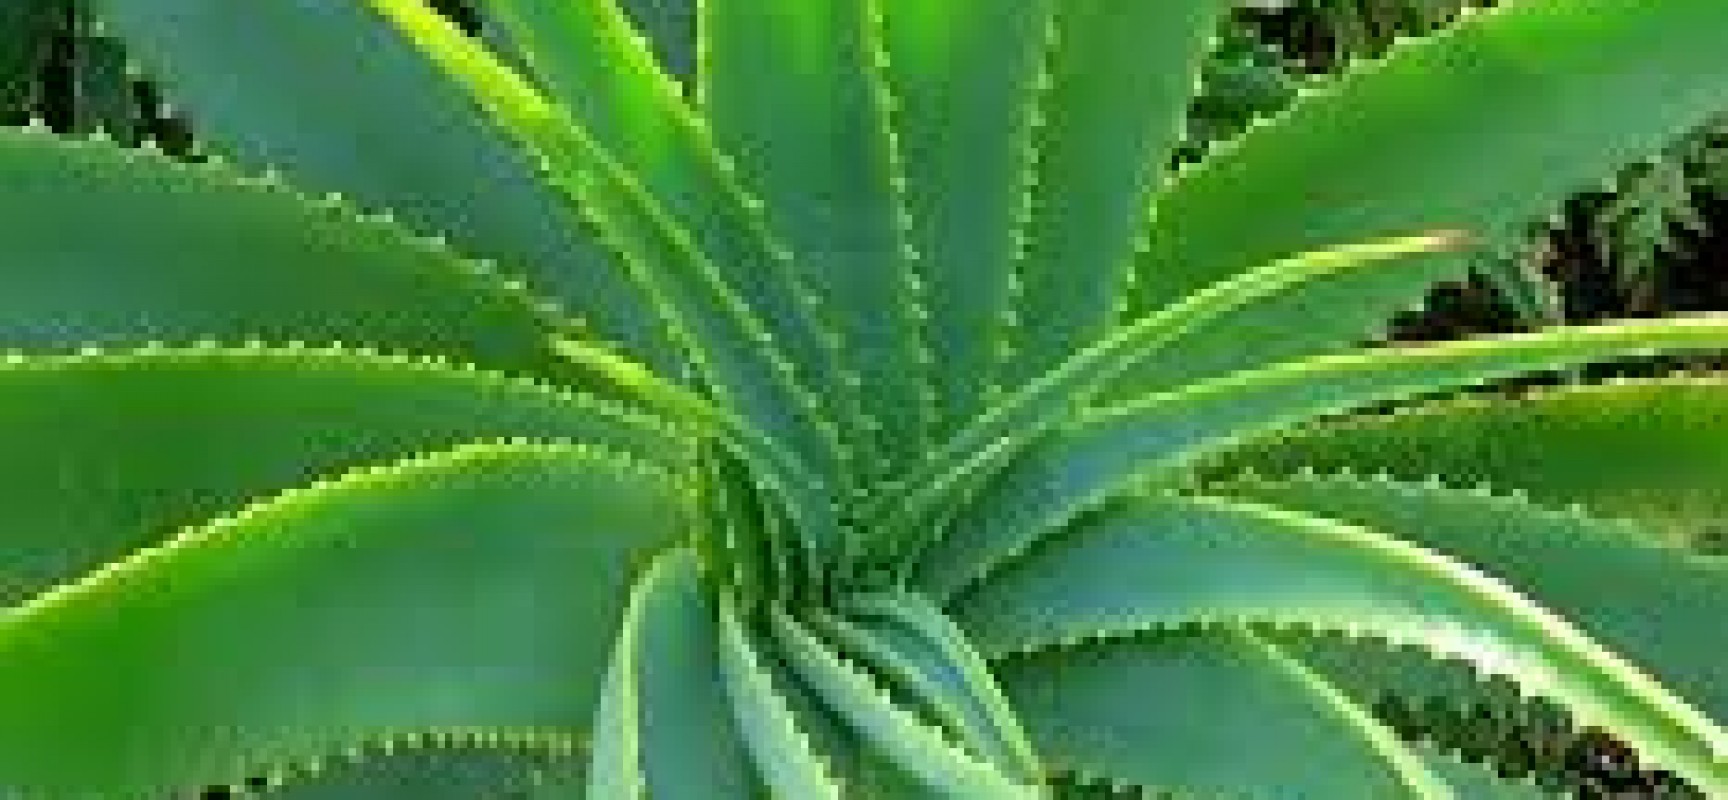 Aloe Vera comes with an antiseptic and medicinal properties